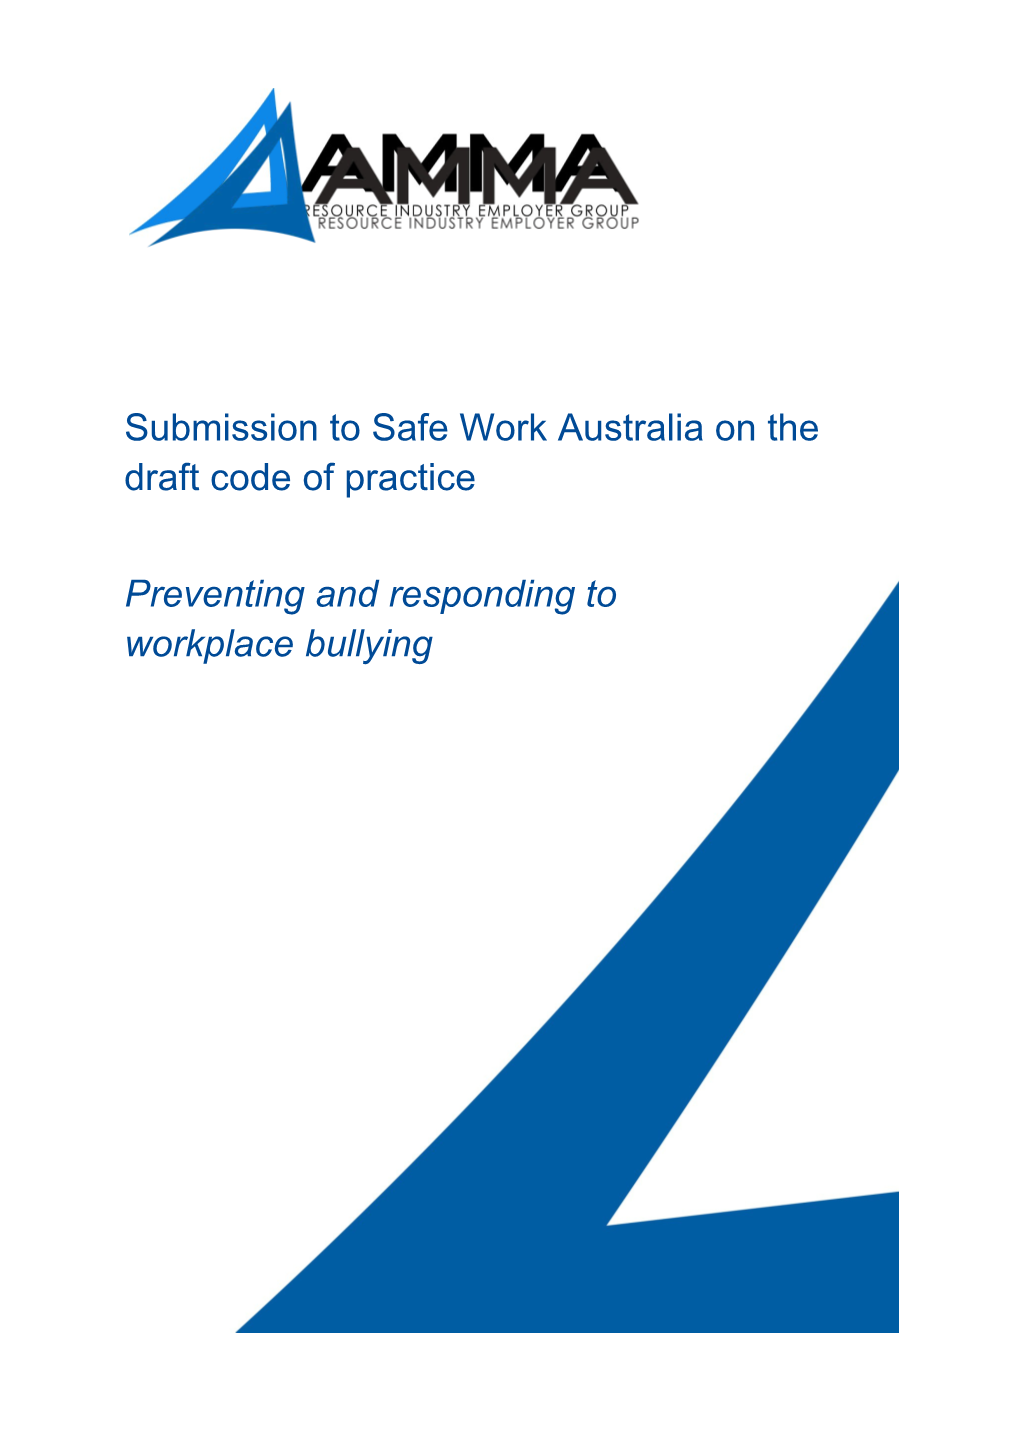 Submission to Safe Work Australia on the Draft Code of Practice